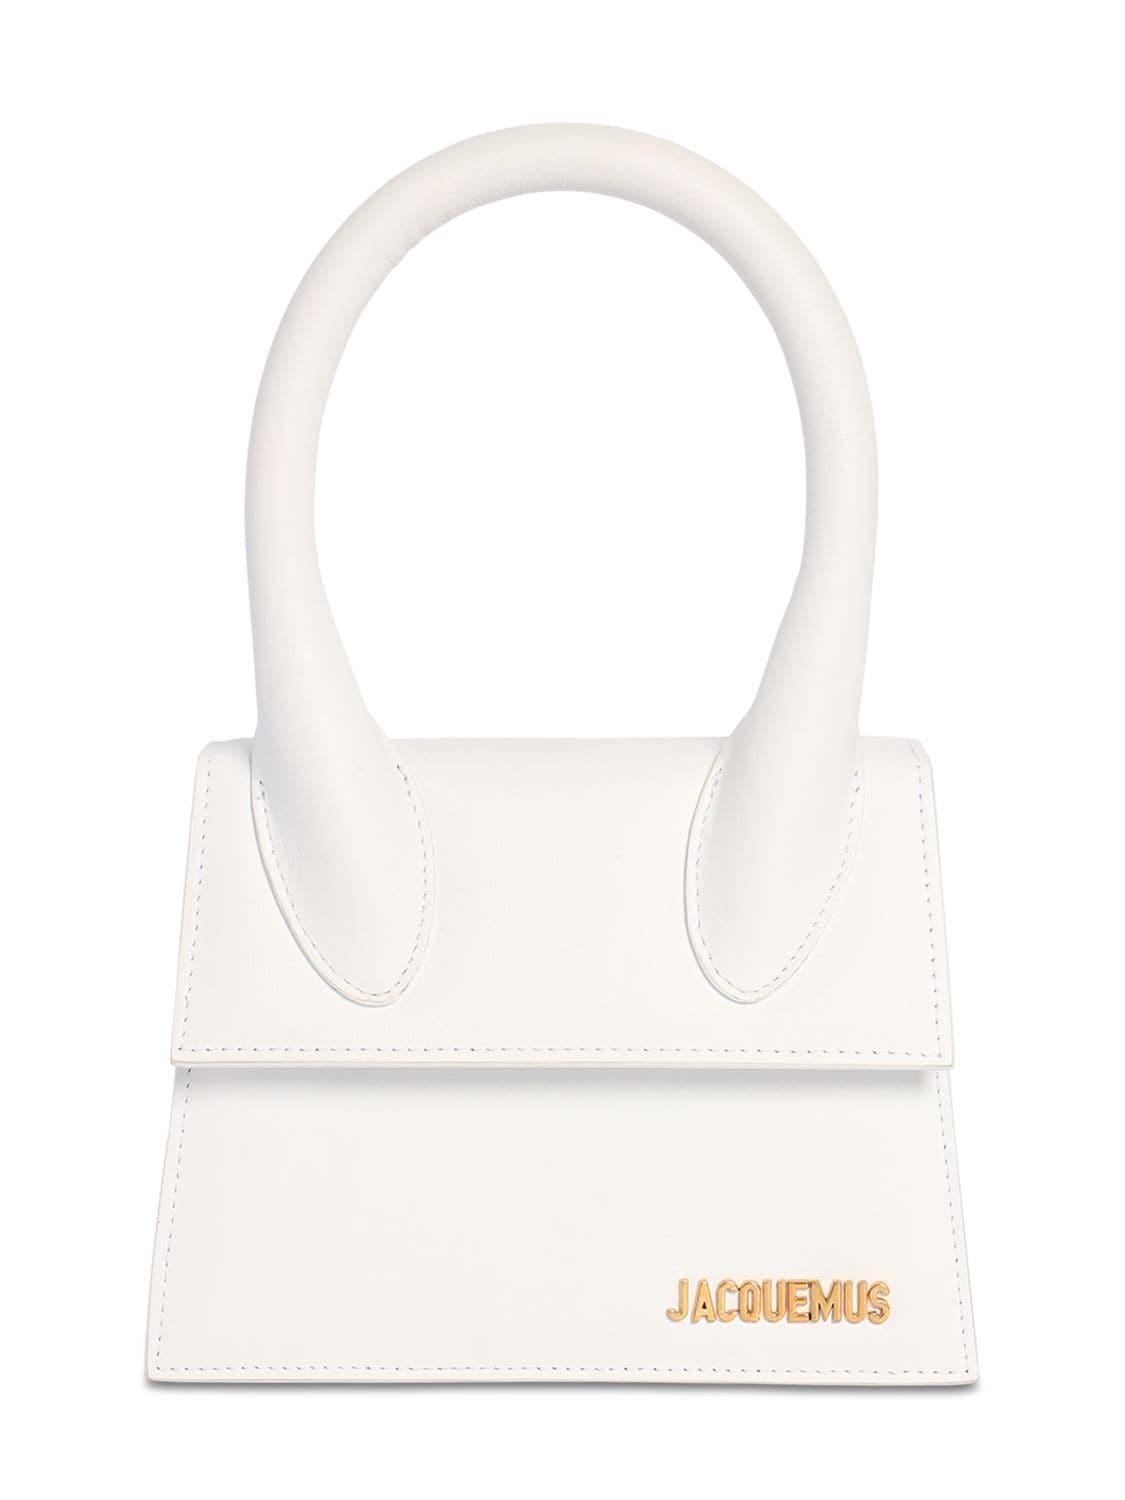 Jacquemus Le Chiquito Leather Top Handle Bag in White - Save 56% - Lyst